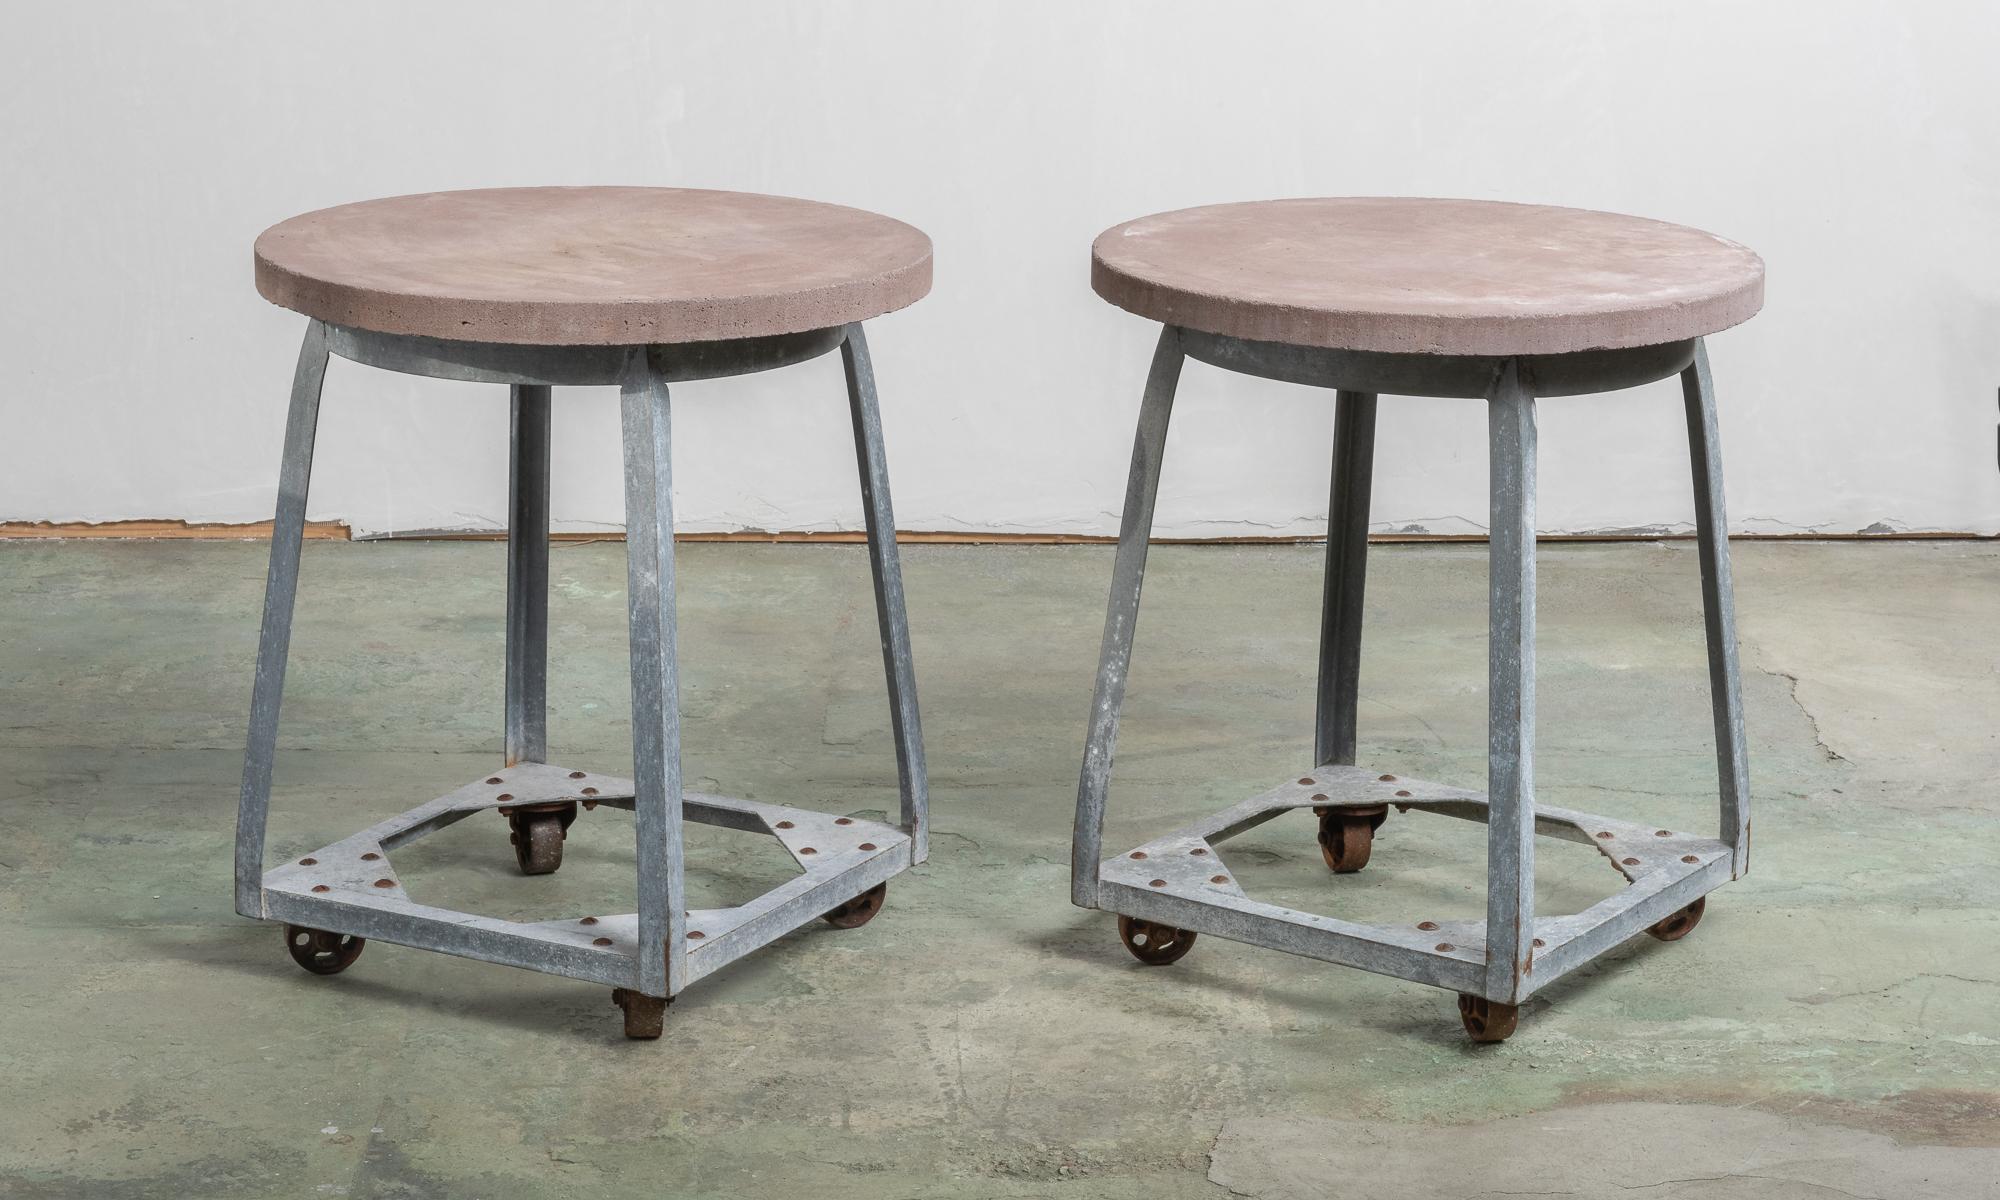 Beautiful industrial forms composed of zinc, with substantial concrete tops, and steel castors.